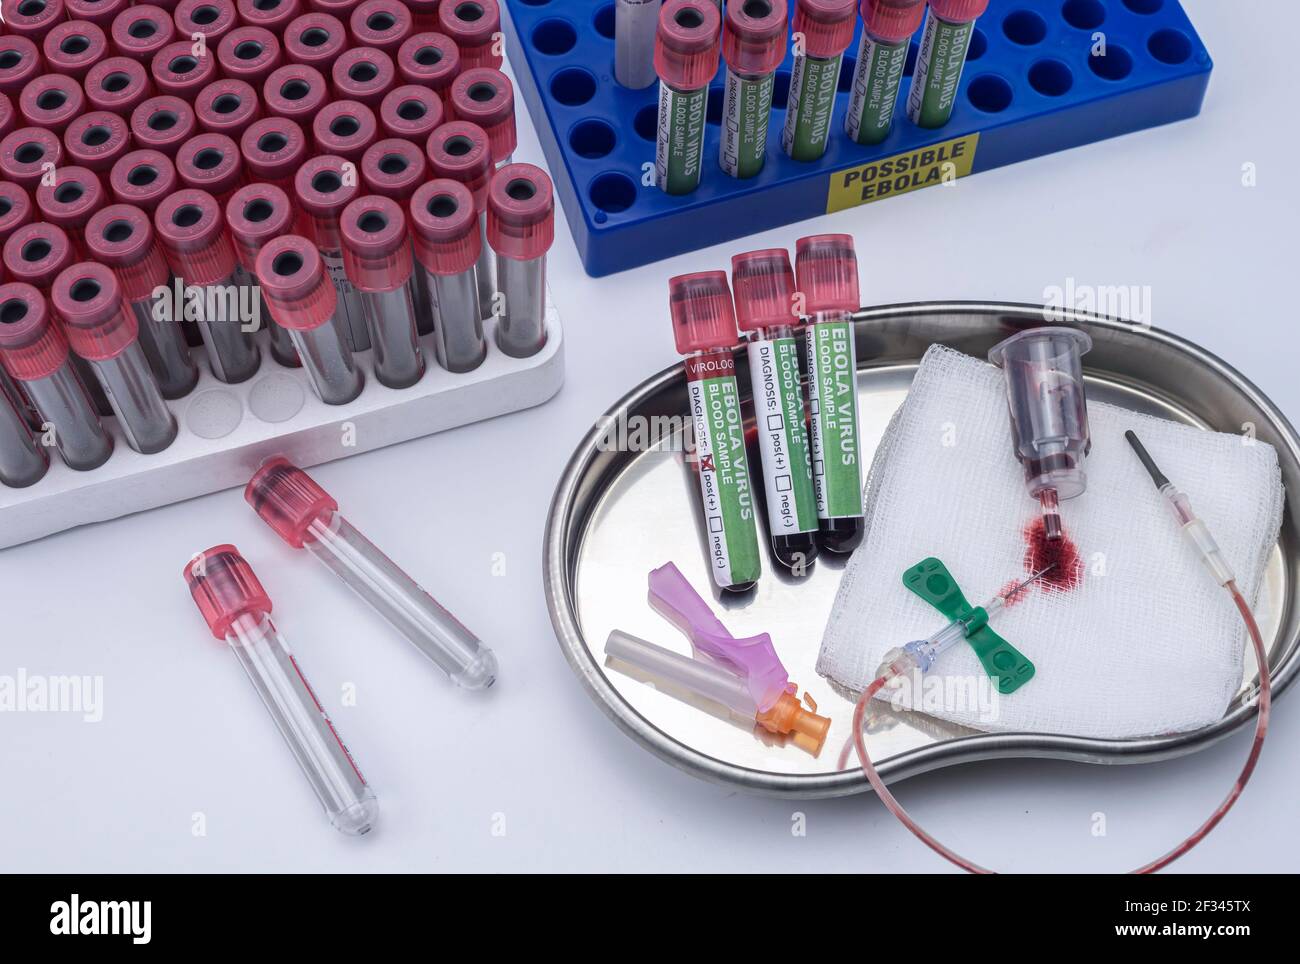 Sample vials of blood from possible Ebola patients infected with new Zaire strain of Ebola, concept image Stock Photo